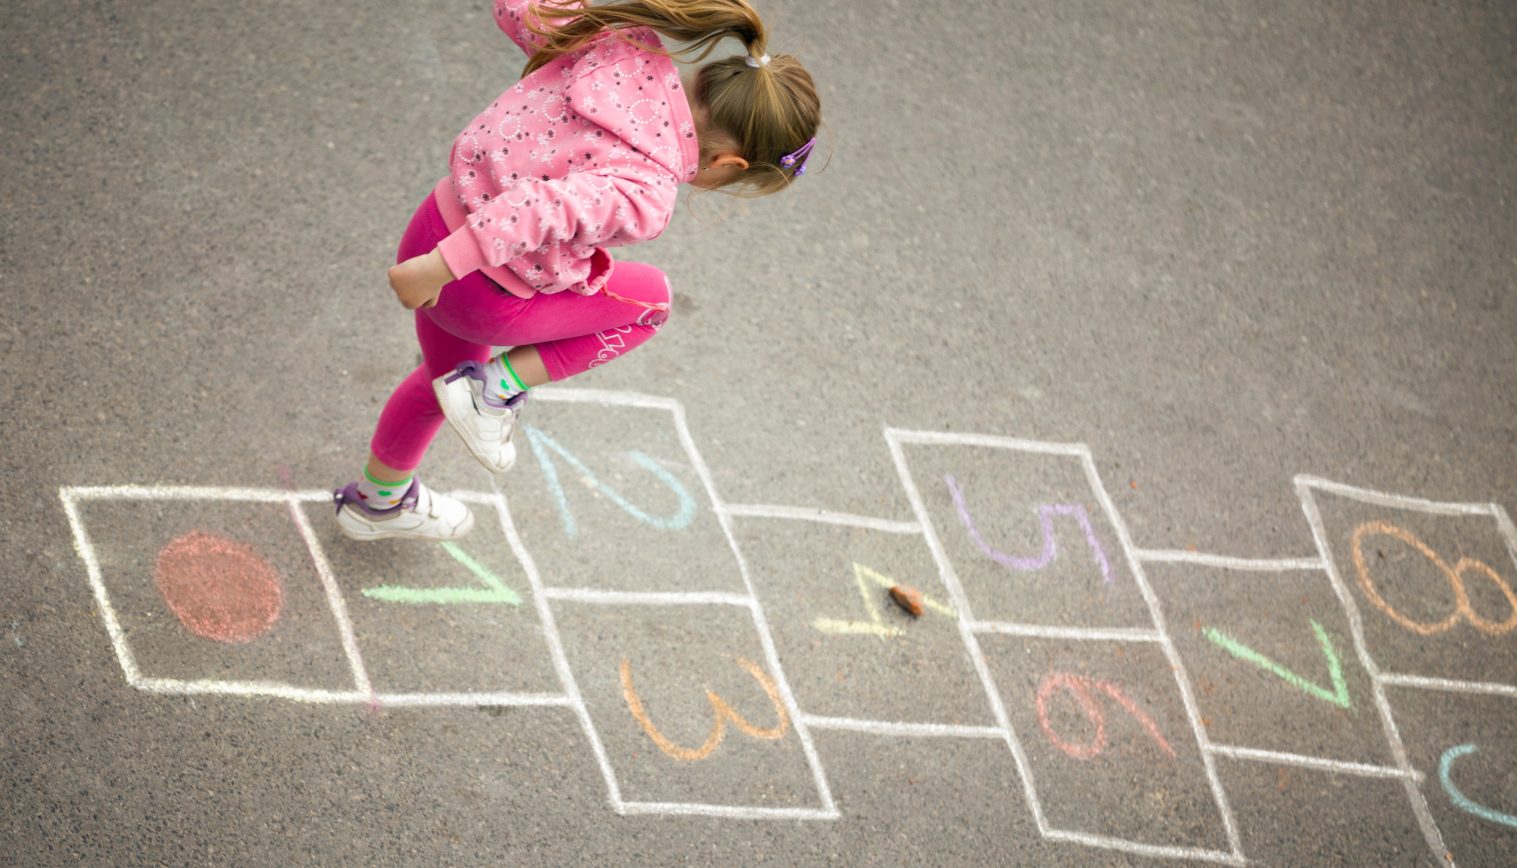 Great Outdoor Games To Inspire Learning For Young Students